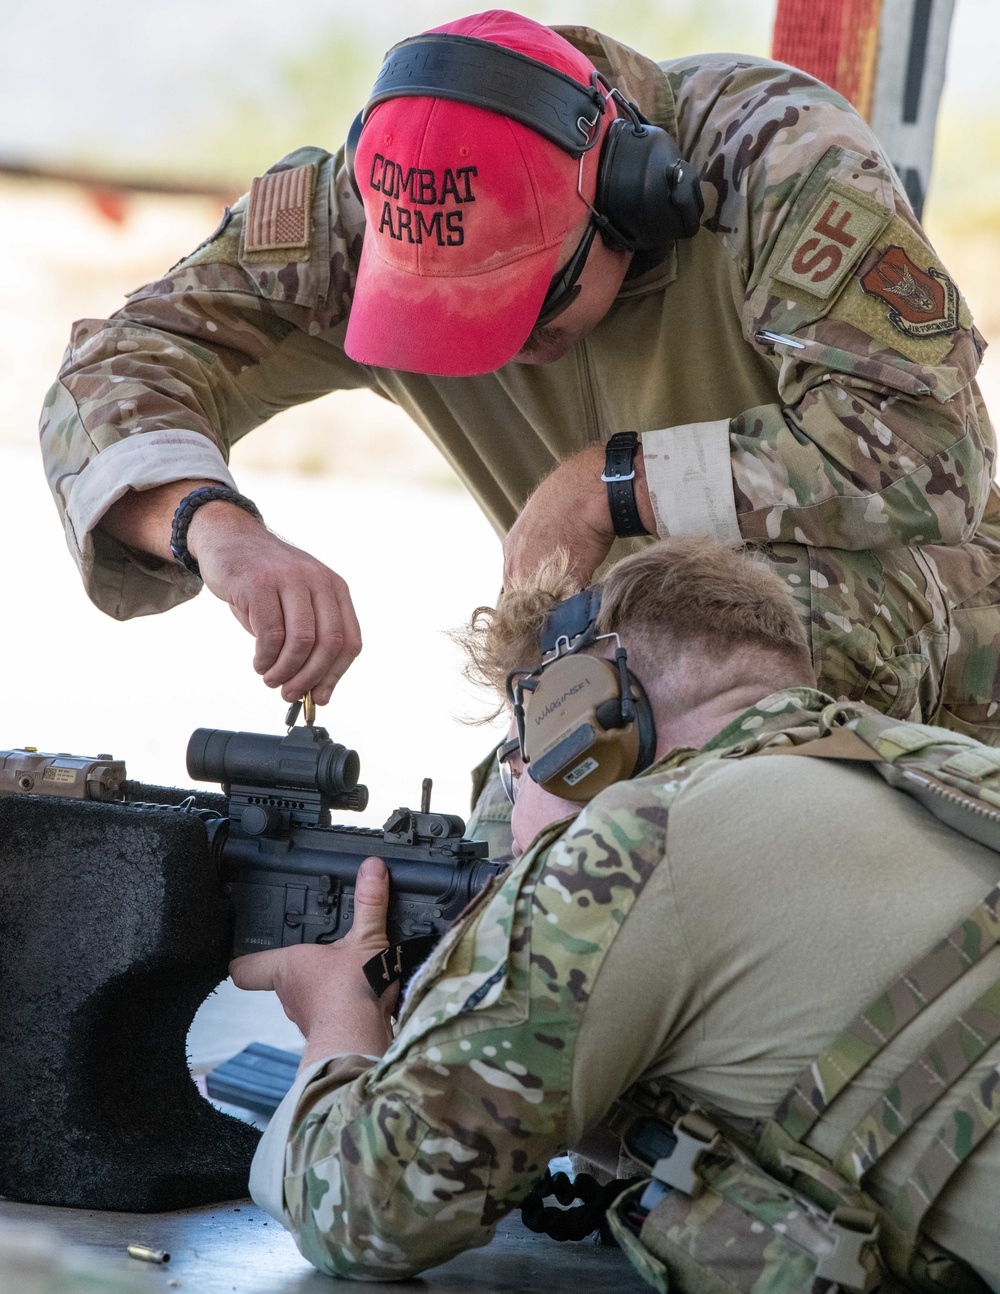 305th Rescue Squadron Weapons Training at Davis-Monthan